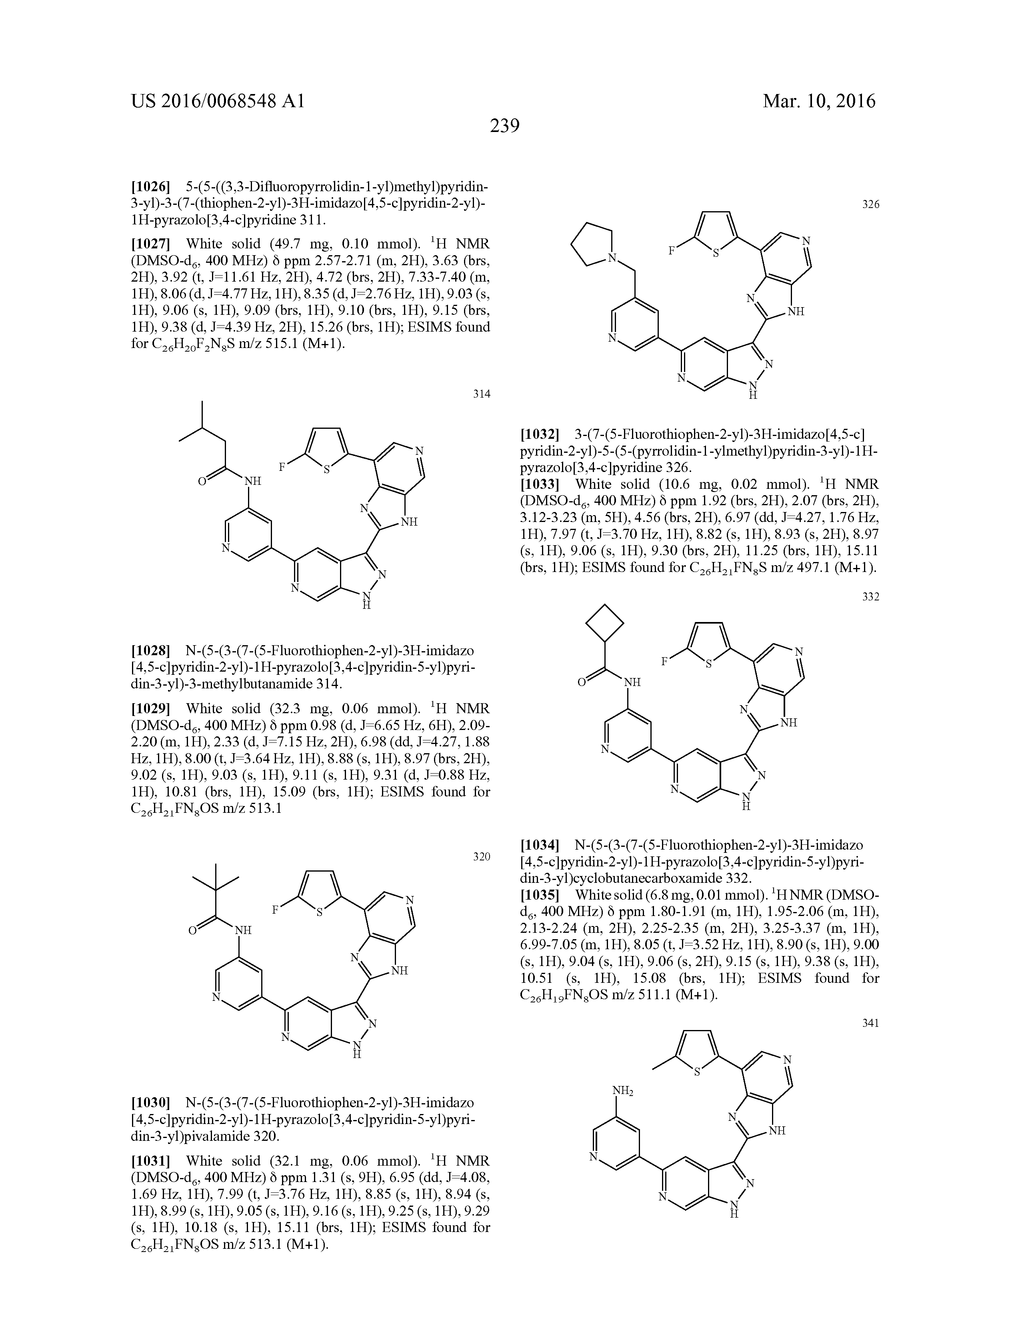 3-(3H-IMIDAZO[4,5-C]PYRIDIN-2-YL)-1H-PYRAZOLO[3,4-C]PYRIDINE AND     THERAPEUTIC USES THEREOF - diagram, schematic, and image 240